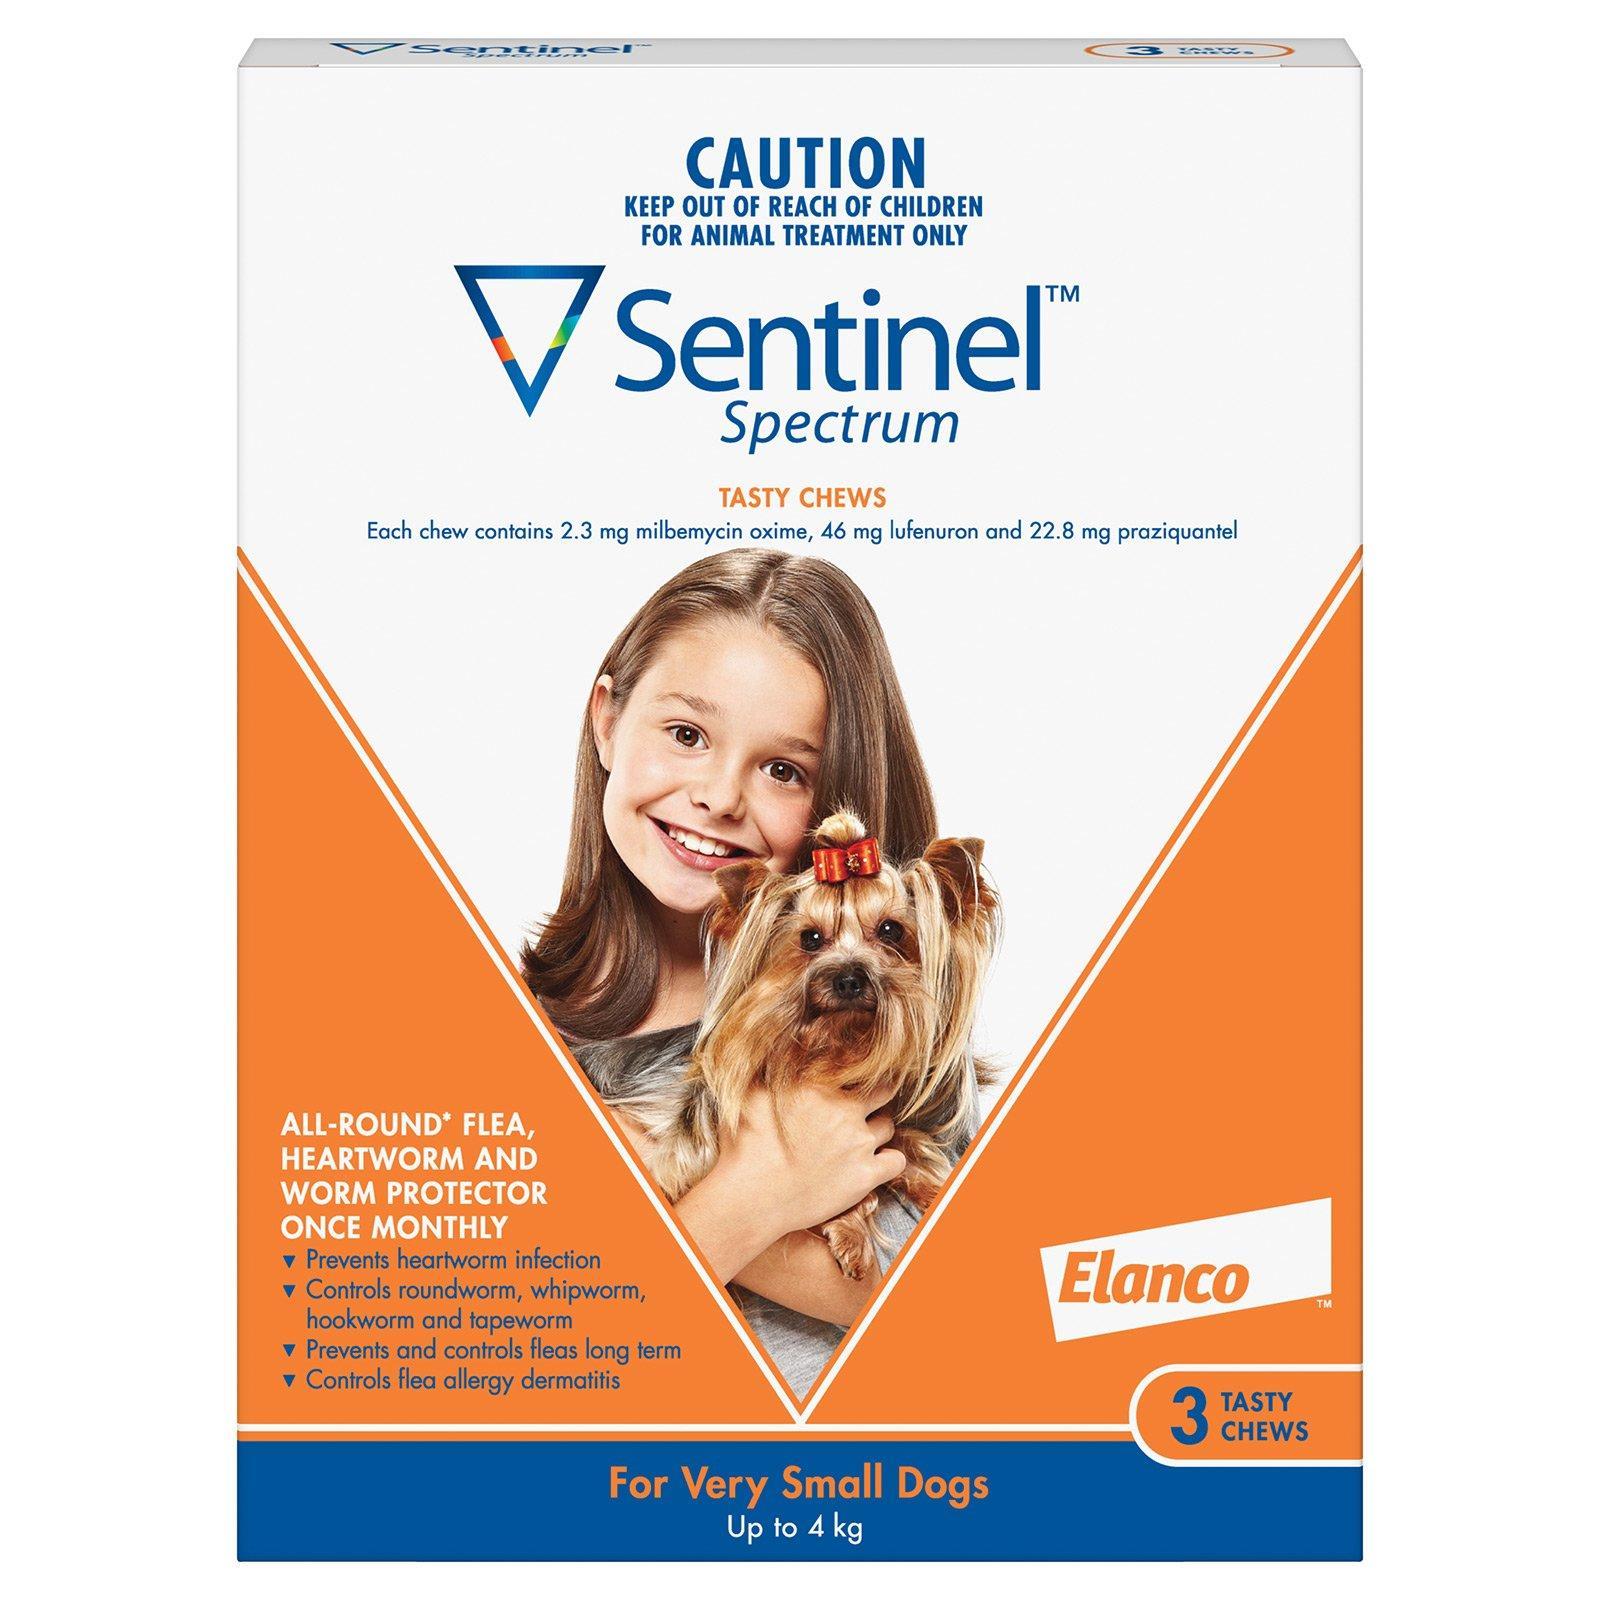 Sentinel Spectrum Tasty Chews For Very Small Dogs Up To 4Kg (Orange) 3 Chews